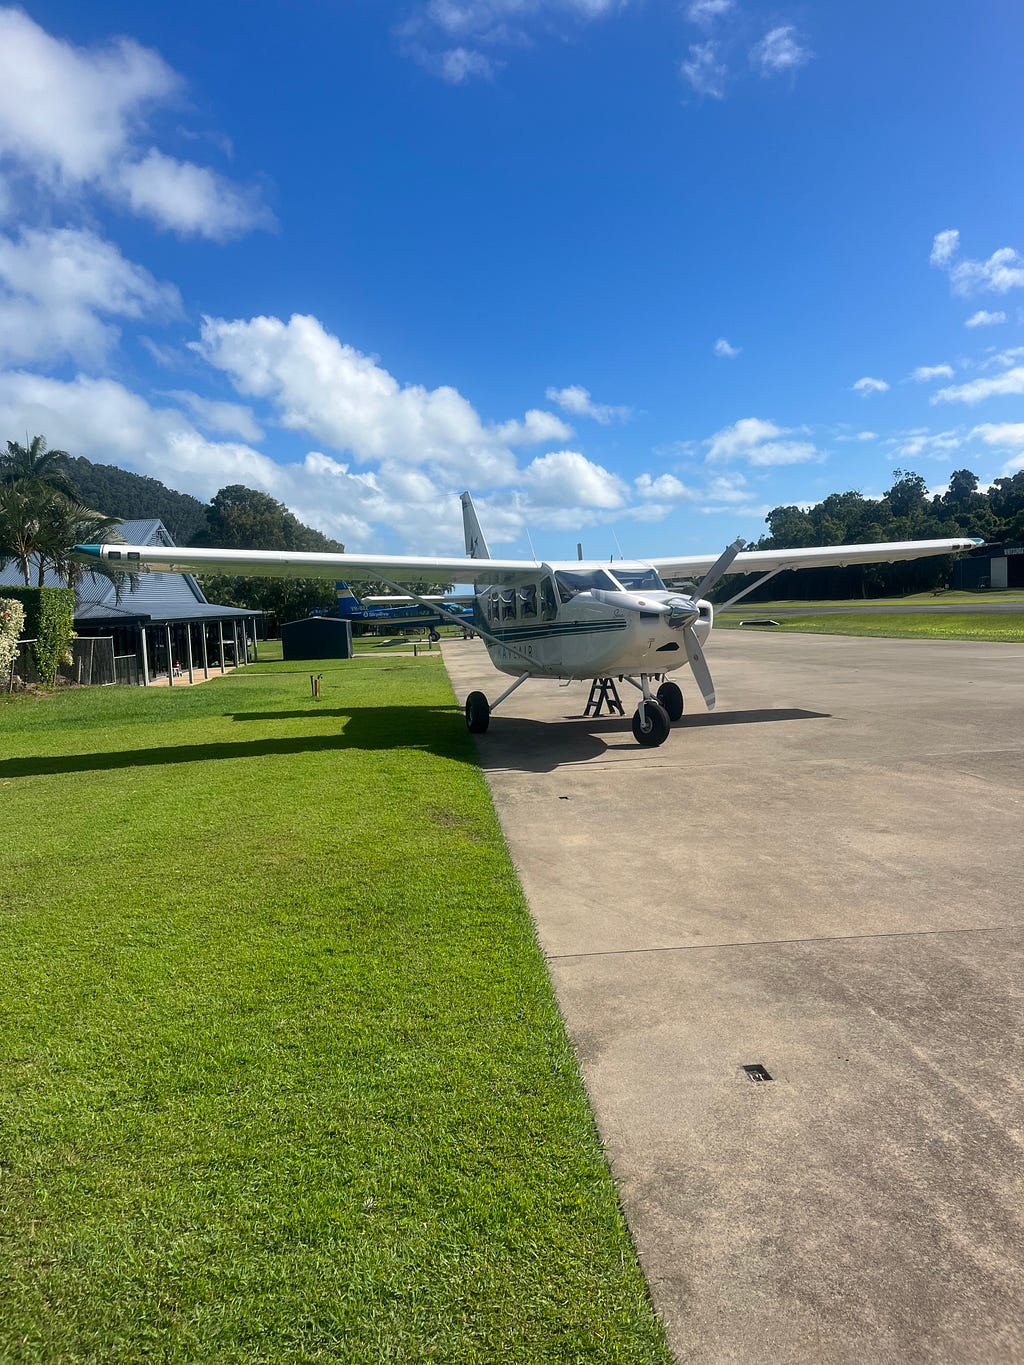 Small aircraft used for Heart Reef flight, providing aerial tours over the Great Barrier Reef, offering passengers an unforgettable experience of exploring natural wonders from above in Airlie Beach, Queensland, Australia.